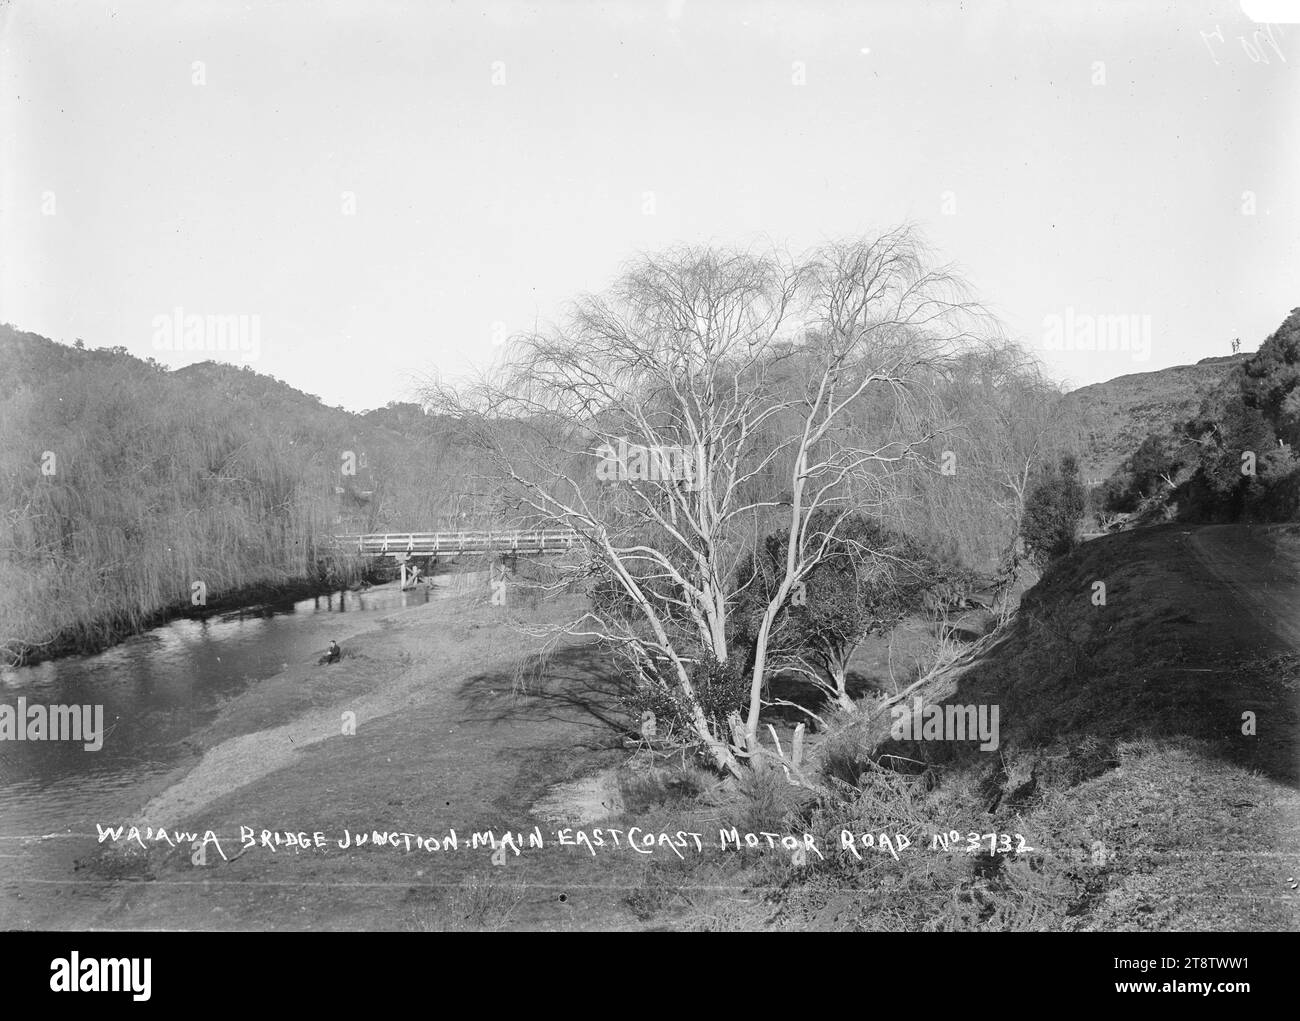 Waiaua Bridge Junction on the main East Coast Road, Bay of Plenty, View of the river with the road bridge in the middle distance. A man is sitting on the river bank. in early 1900s Stock Photo